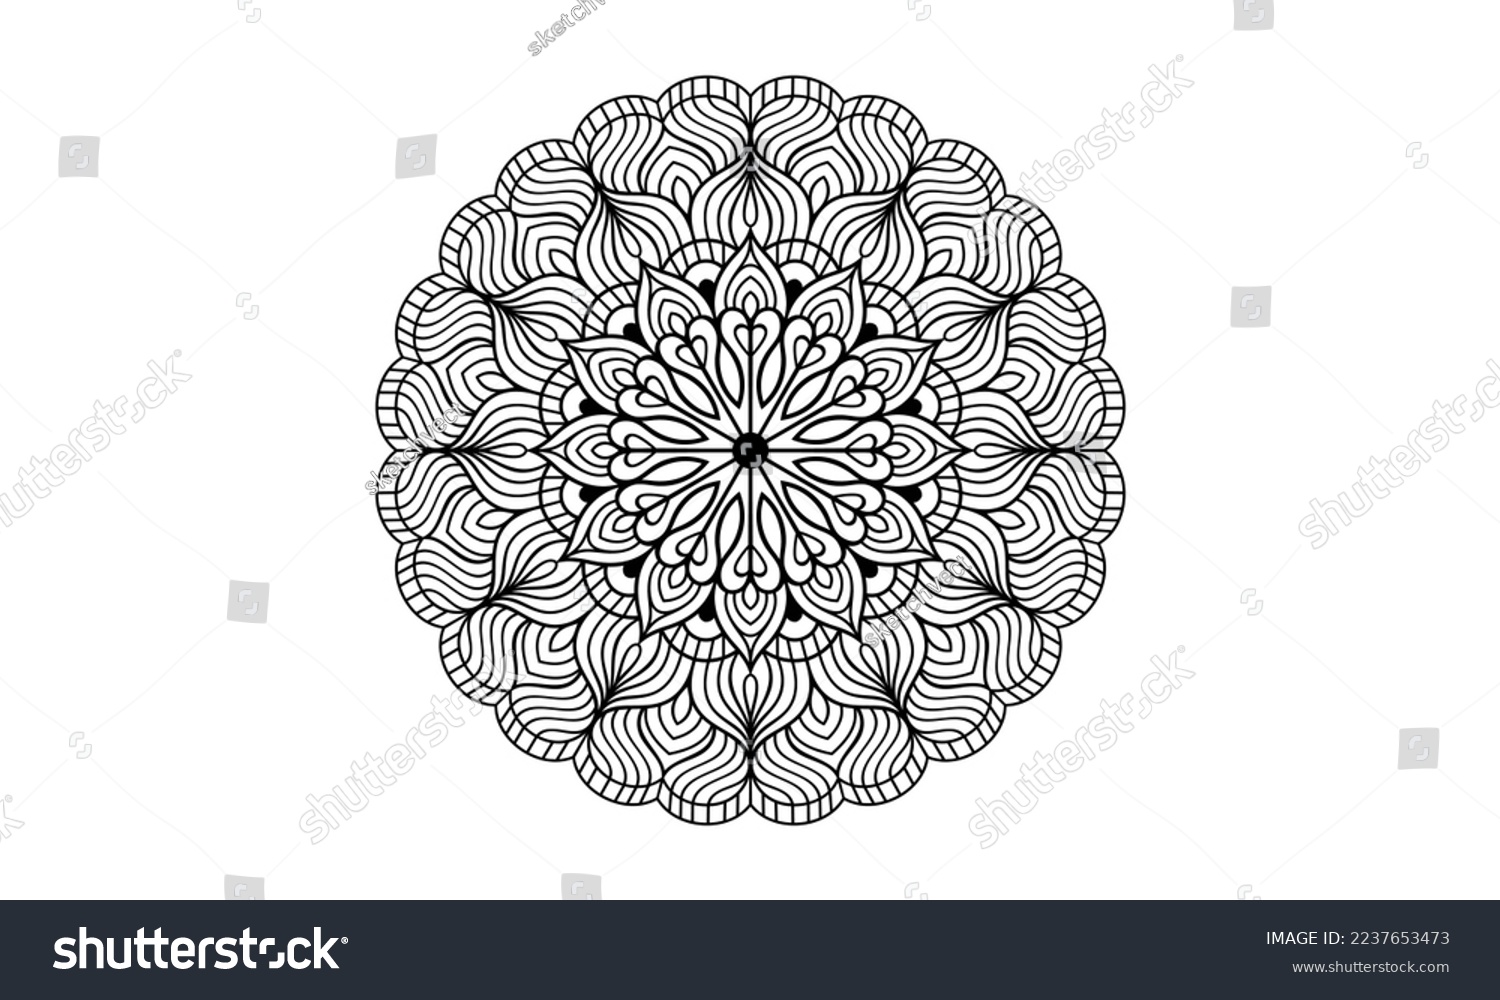 SVG of Mandala Circular pattern design for Henna, Mehndi, tattoo, decoration.
Decorative ornament in ethnic oriental style. Coloring book page. svg